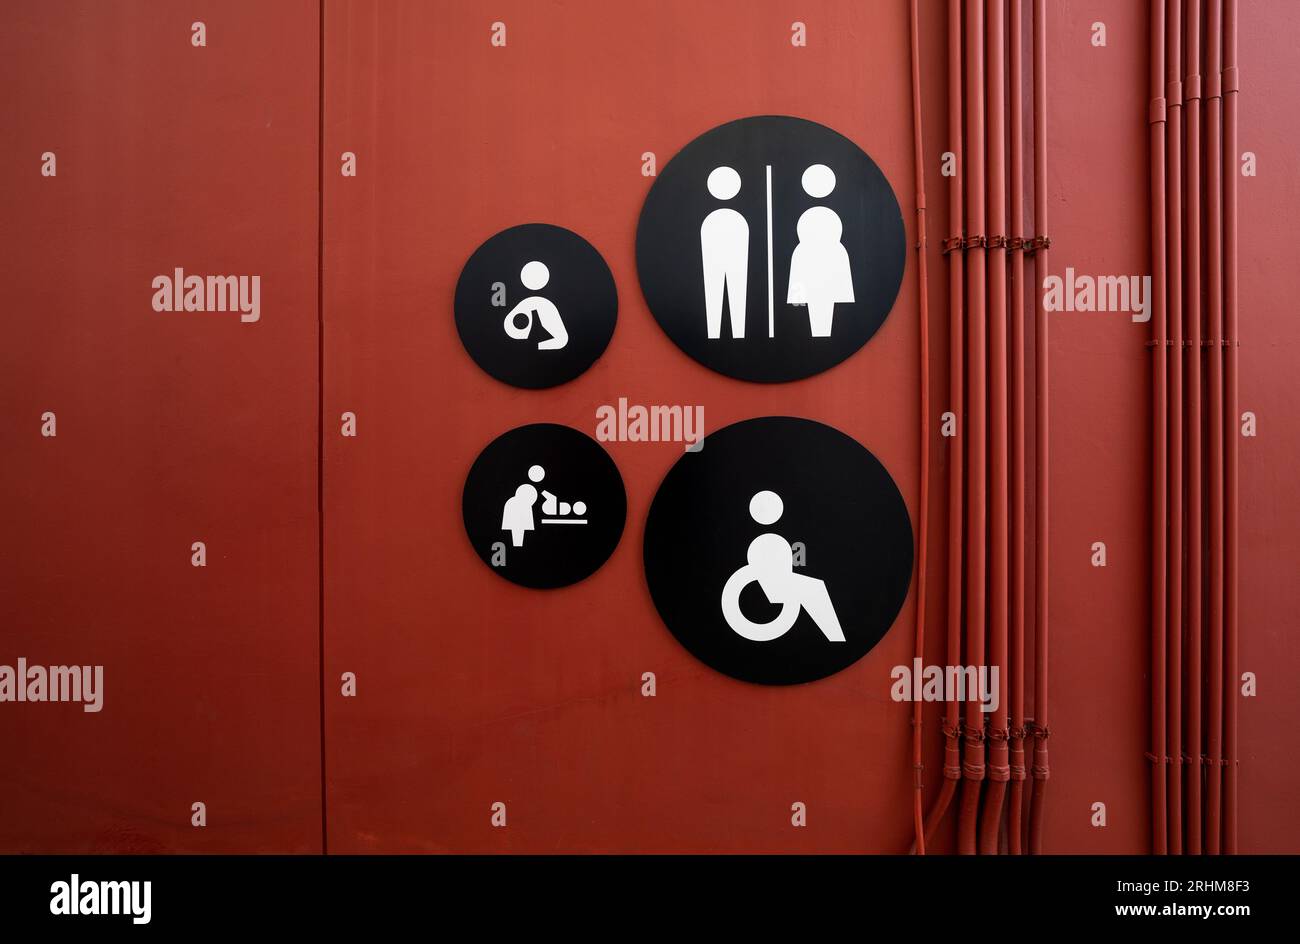 Public toilet sign. Woman, men, children, baby diaper changing, and disabled person toilet icon on restroom wall. Public restroom universal icon. Stock Photo